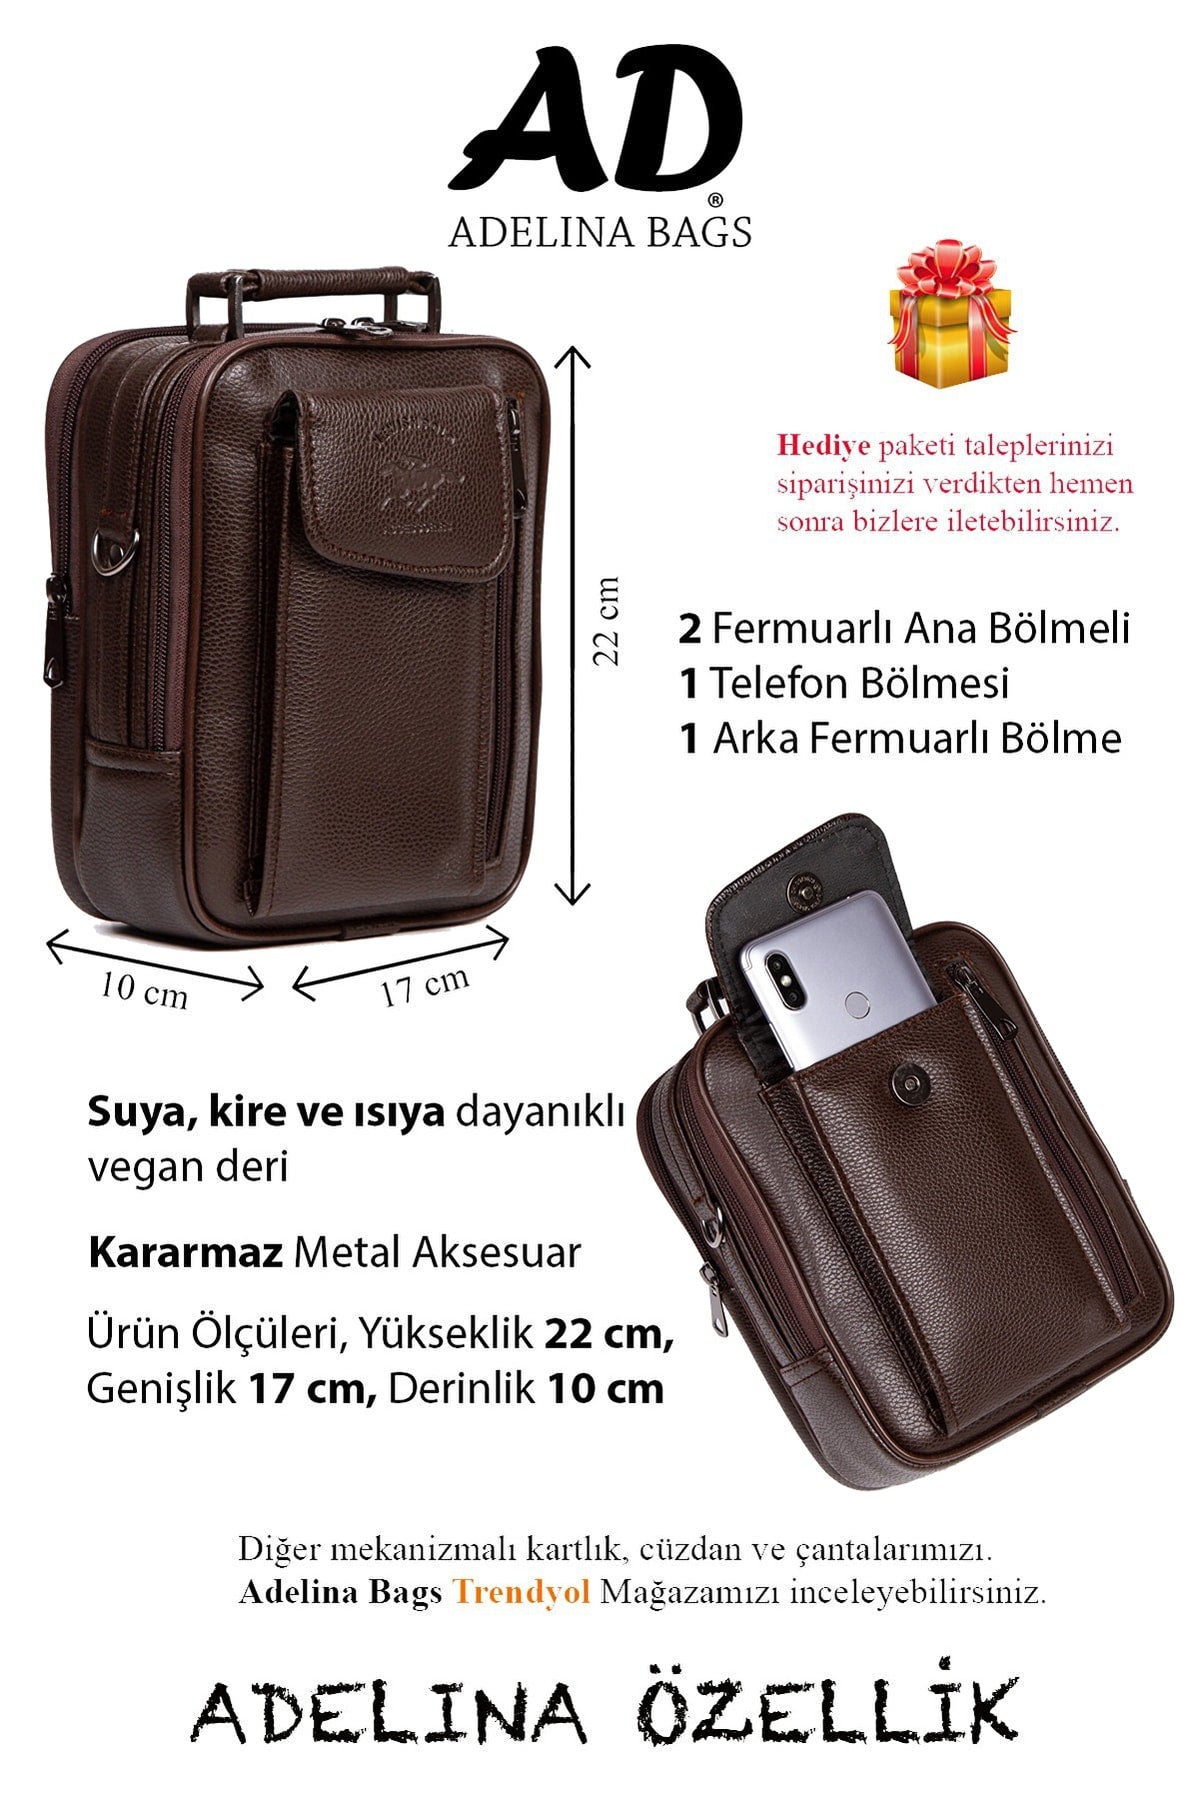 Dark Brown Leather Steel Case Hand And Shoulder Bag With Phone Compartment And Card Holder Wallet With Mechanism